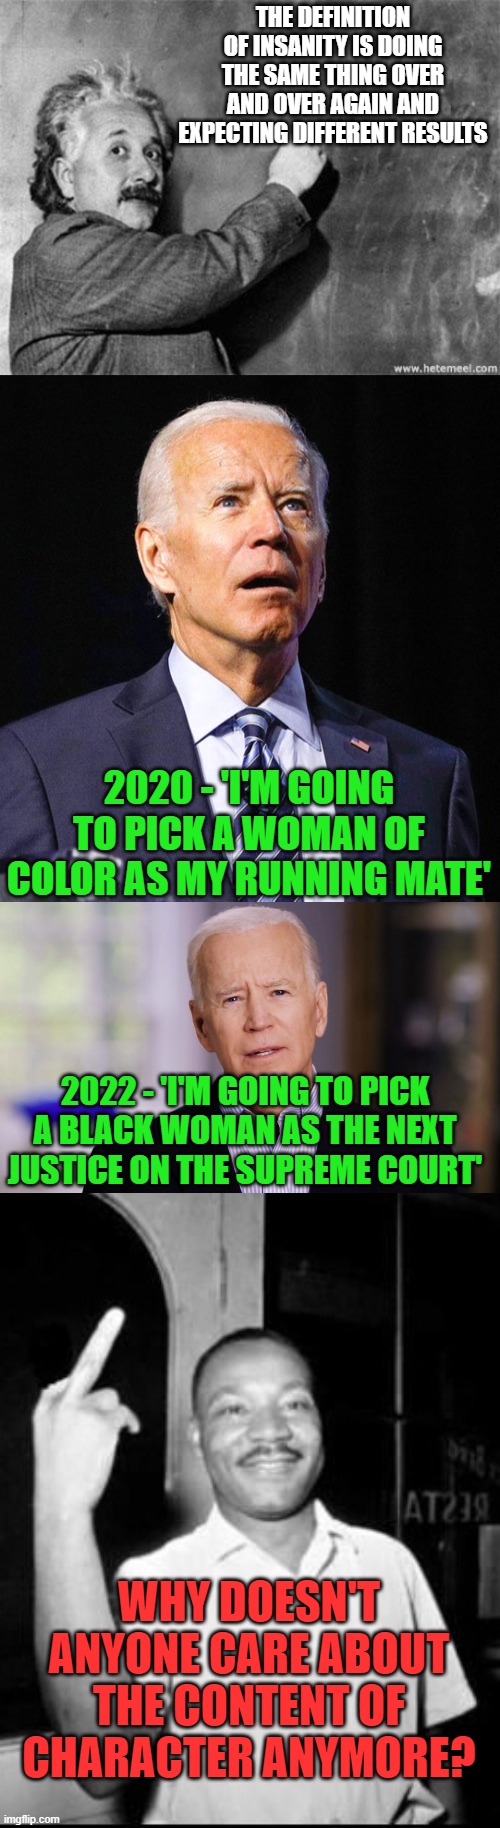 It's like it was just a dream or something! | THE DEFINITION OF INSANITY IS DOING THE SAME THING OVER AND OVER AGAIN AND EXPECTING DIFFERENT RESULTS; 2020 - 'I'M GOING TO PICK A WOMAN OF COLOR AS MY RUNNING MATE'; 2022 - 'I'M GOING TO PICK A BLACK WOMAN AS THE NEXT JUSTICE ON THE SUPREME COURT'; WHY DOESN'T ANYONE CARE ABOUT THE CONTENT OF CHARACTER ANYMORE? | image tagged in einstein on god,joe biden,joe biden 2020,mlk martin luther king jr mlk middle finger the bird | made w/ Imgflip meme maker